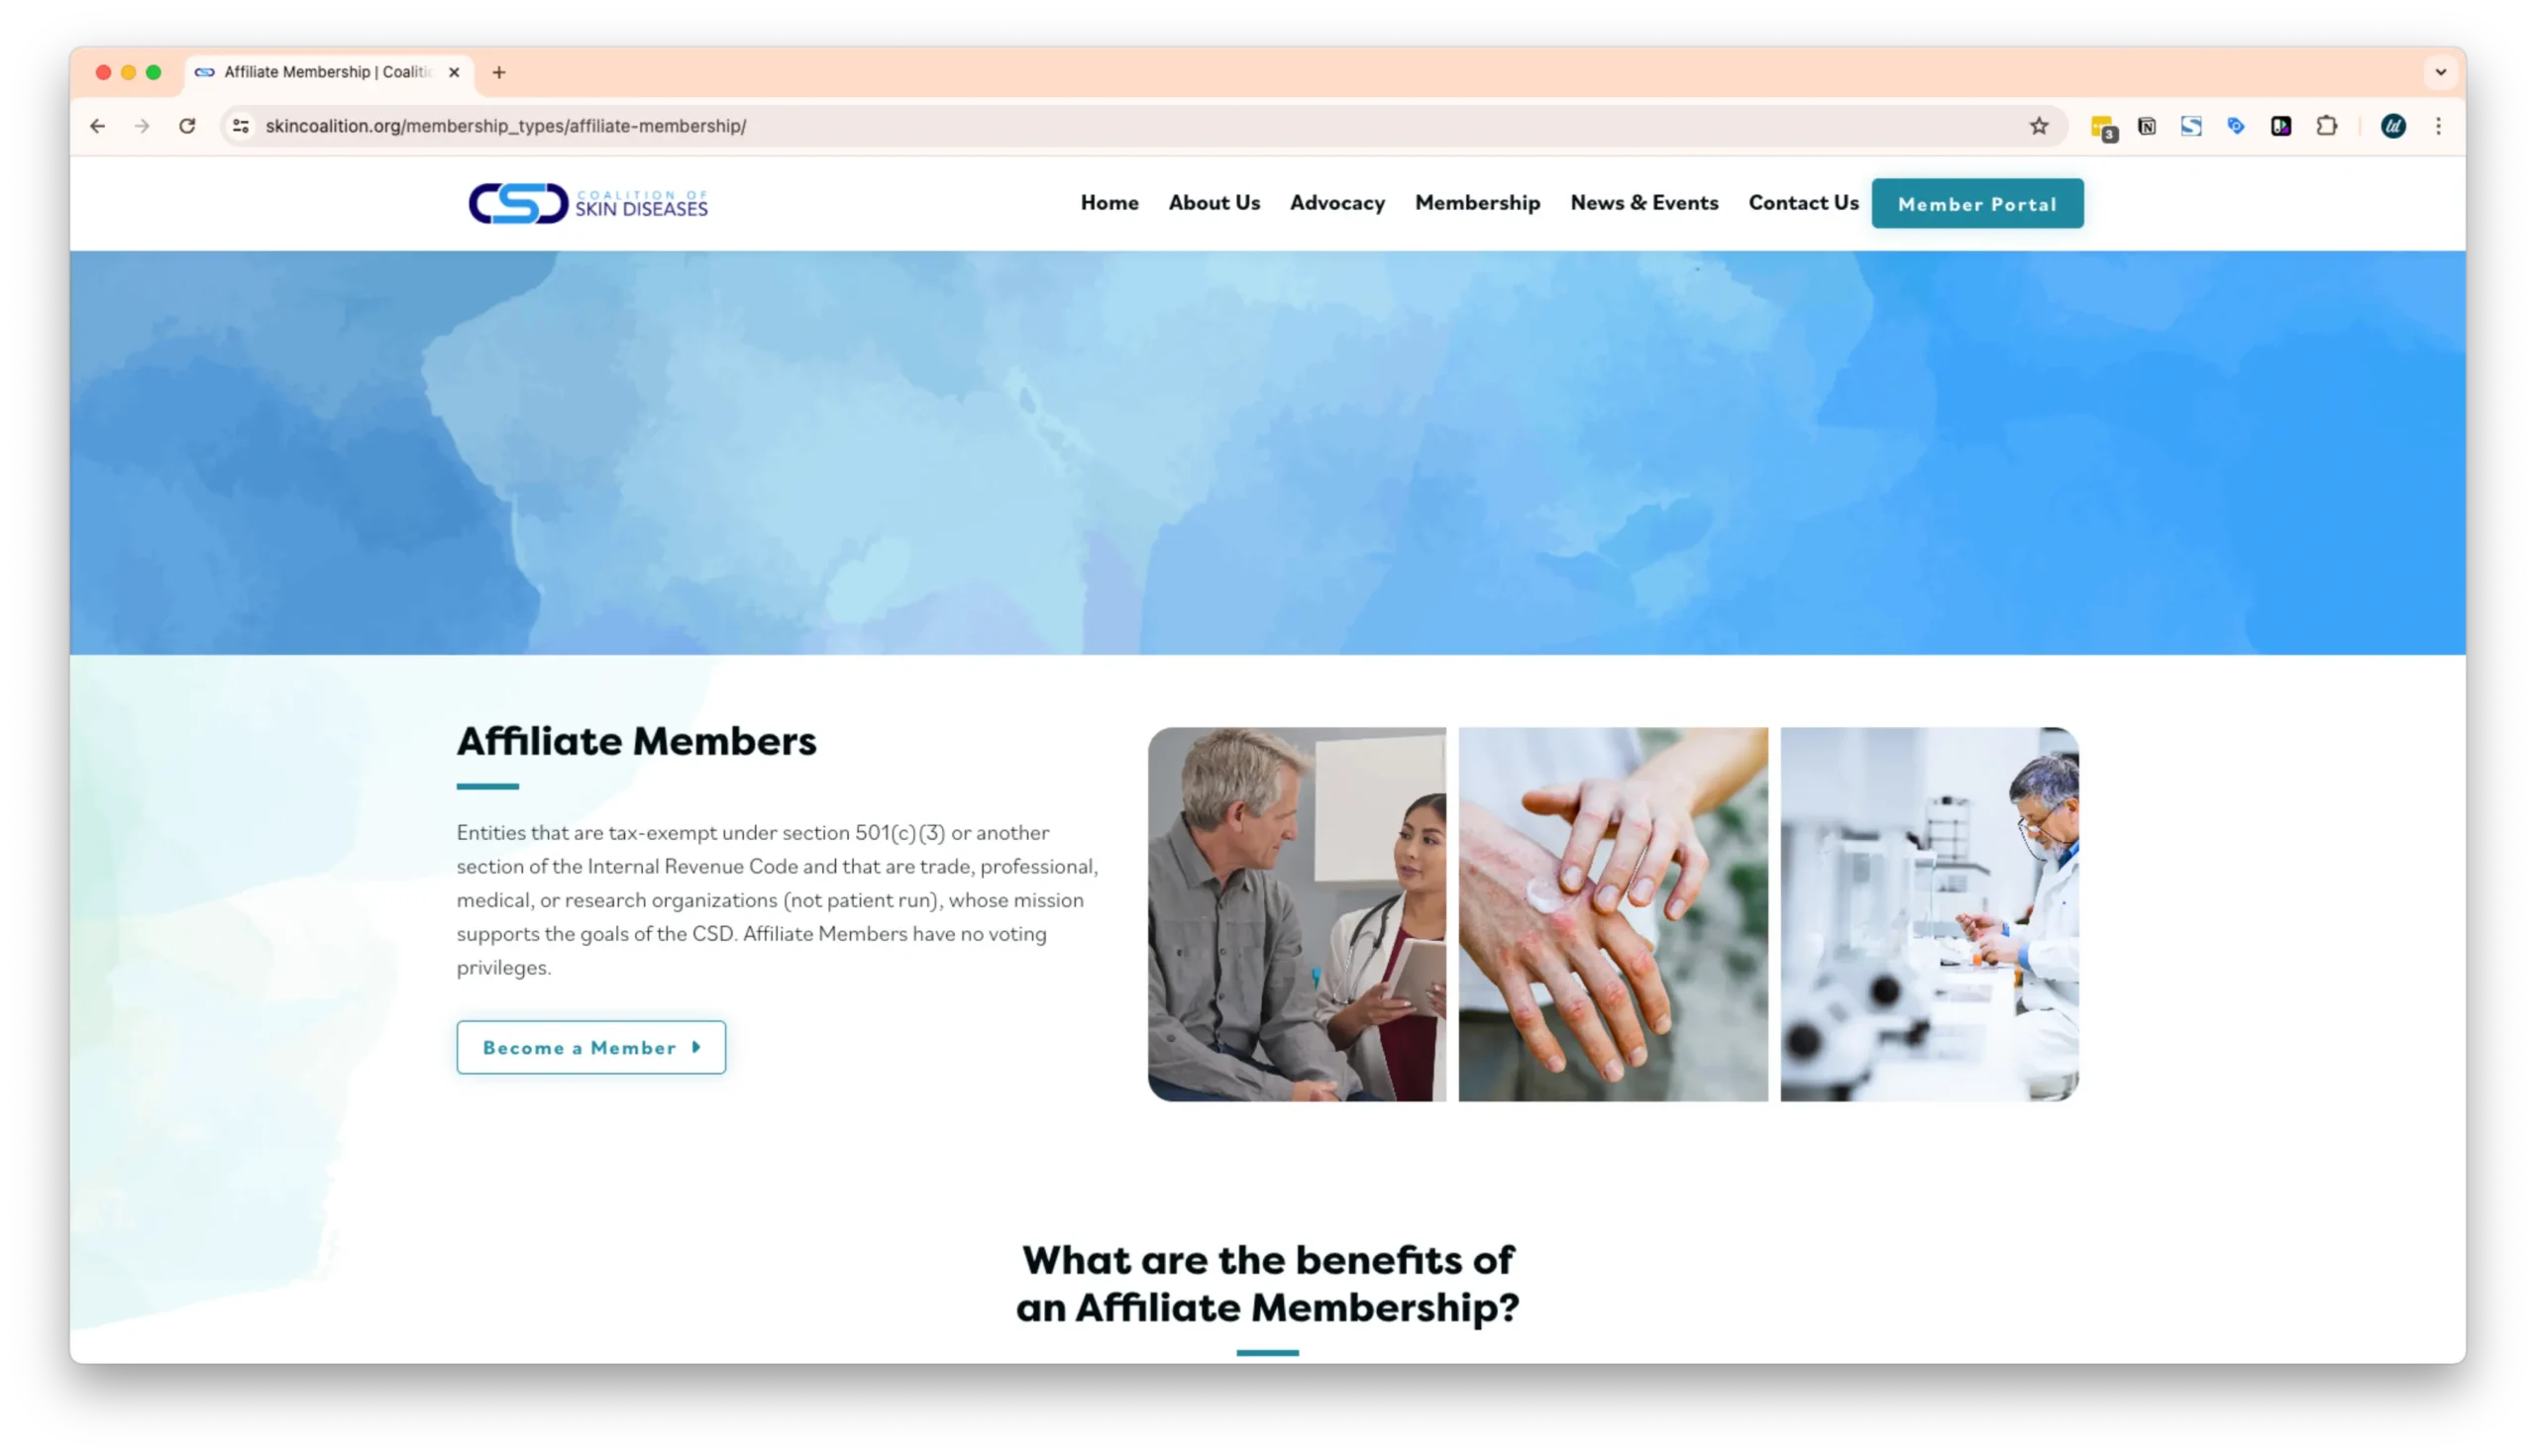 A webpage for affiliate membership with the Coalition of Skin Diseases, featuring images of a doctor consulting a patient, a close-up of hands, and a scientist in a lab. The text describes the benefits and qualifications for membership.